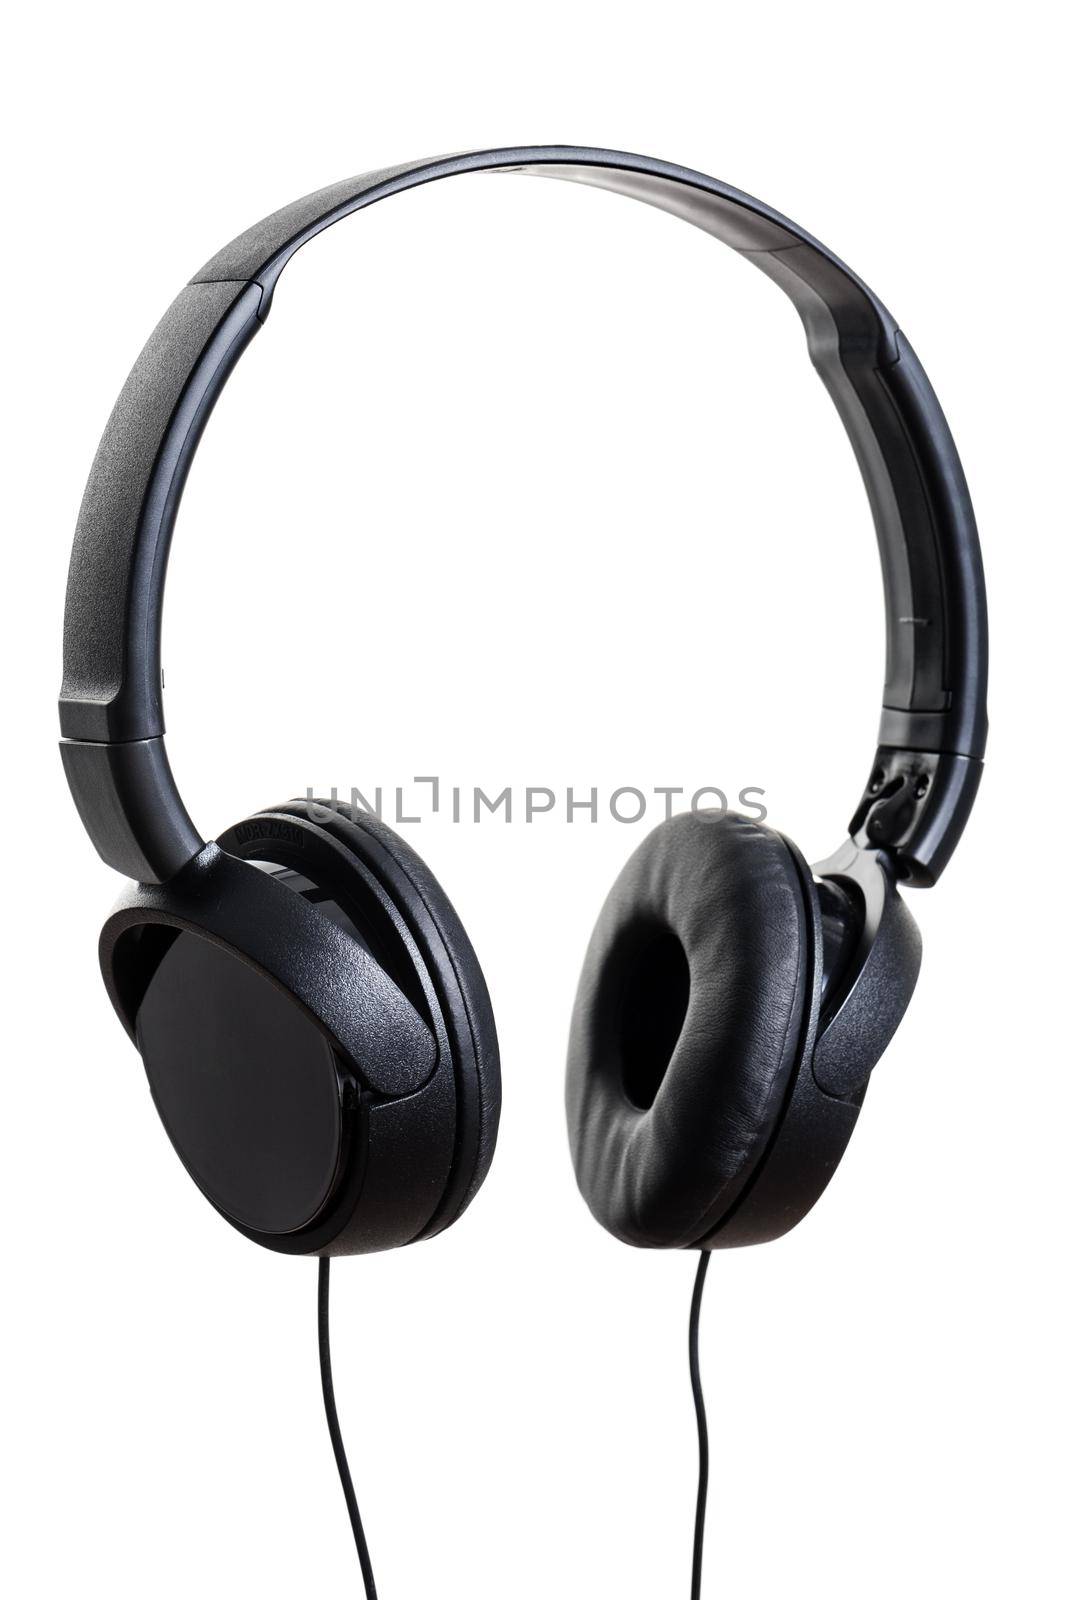 wired black headphone isolated over white background